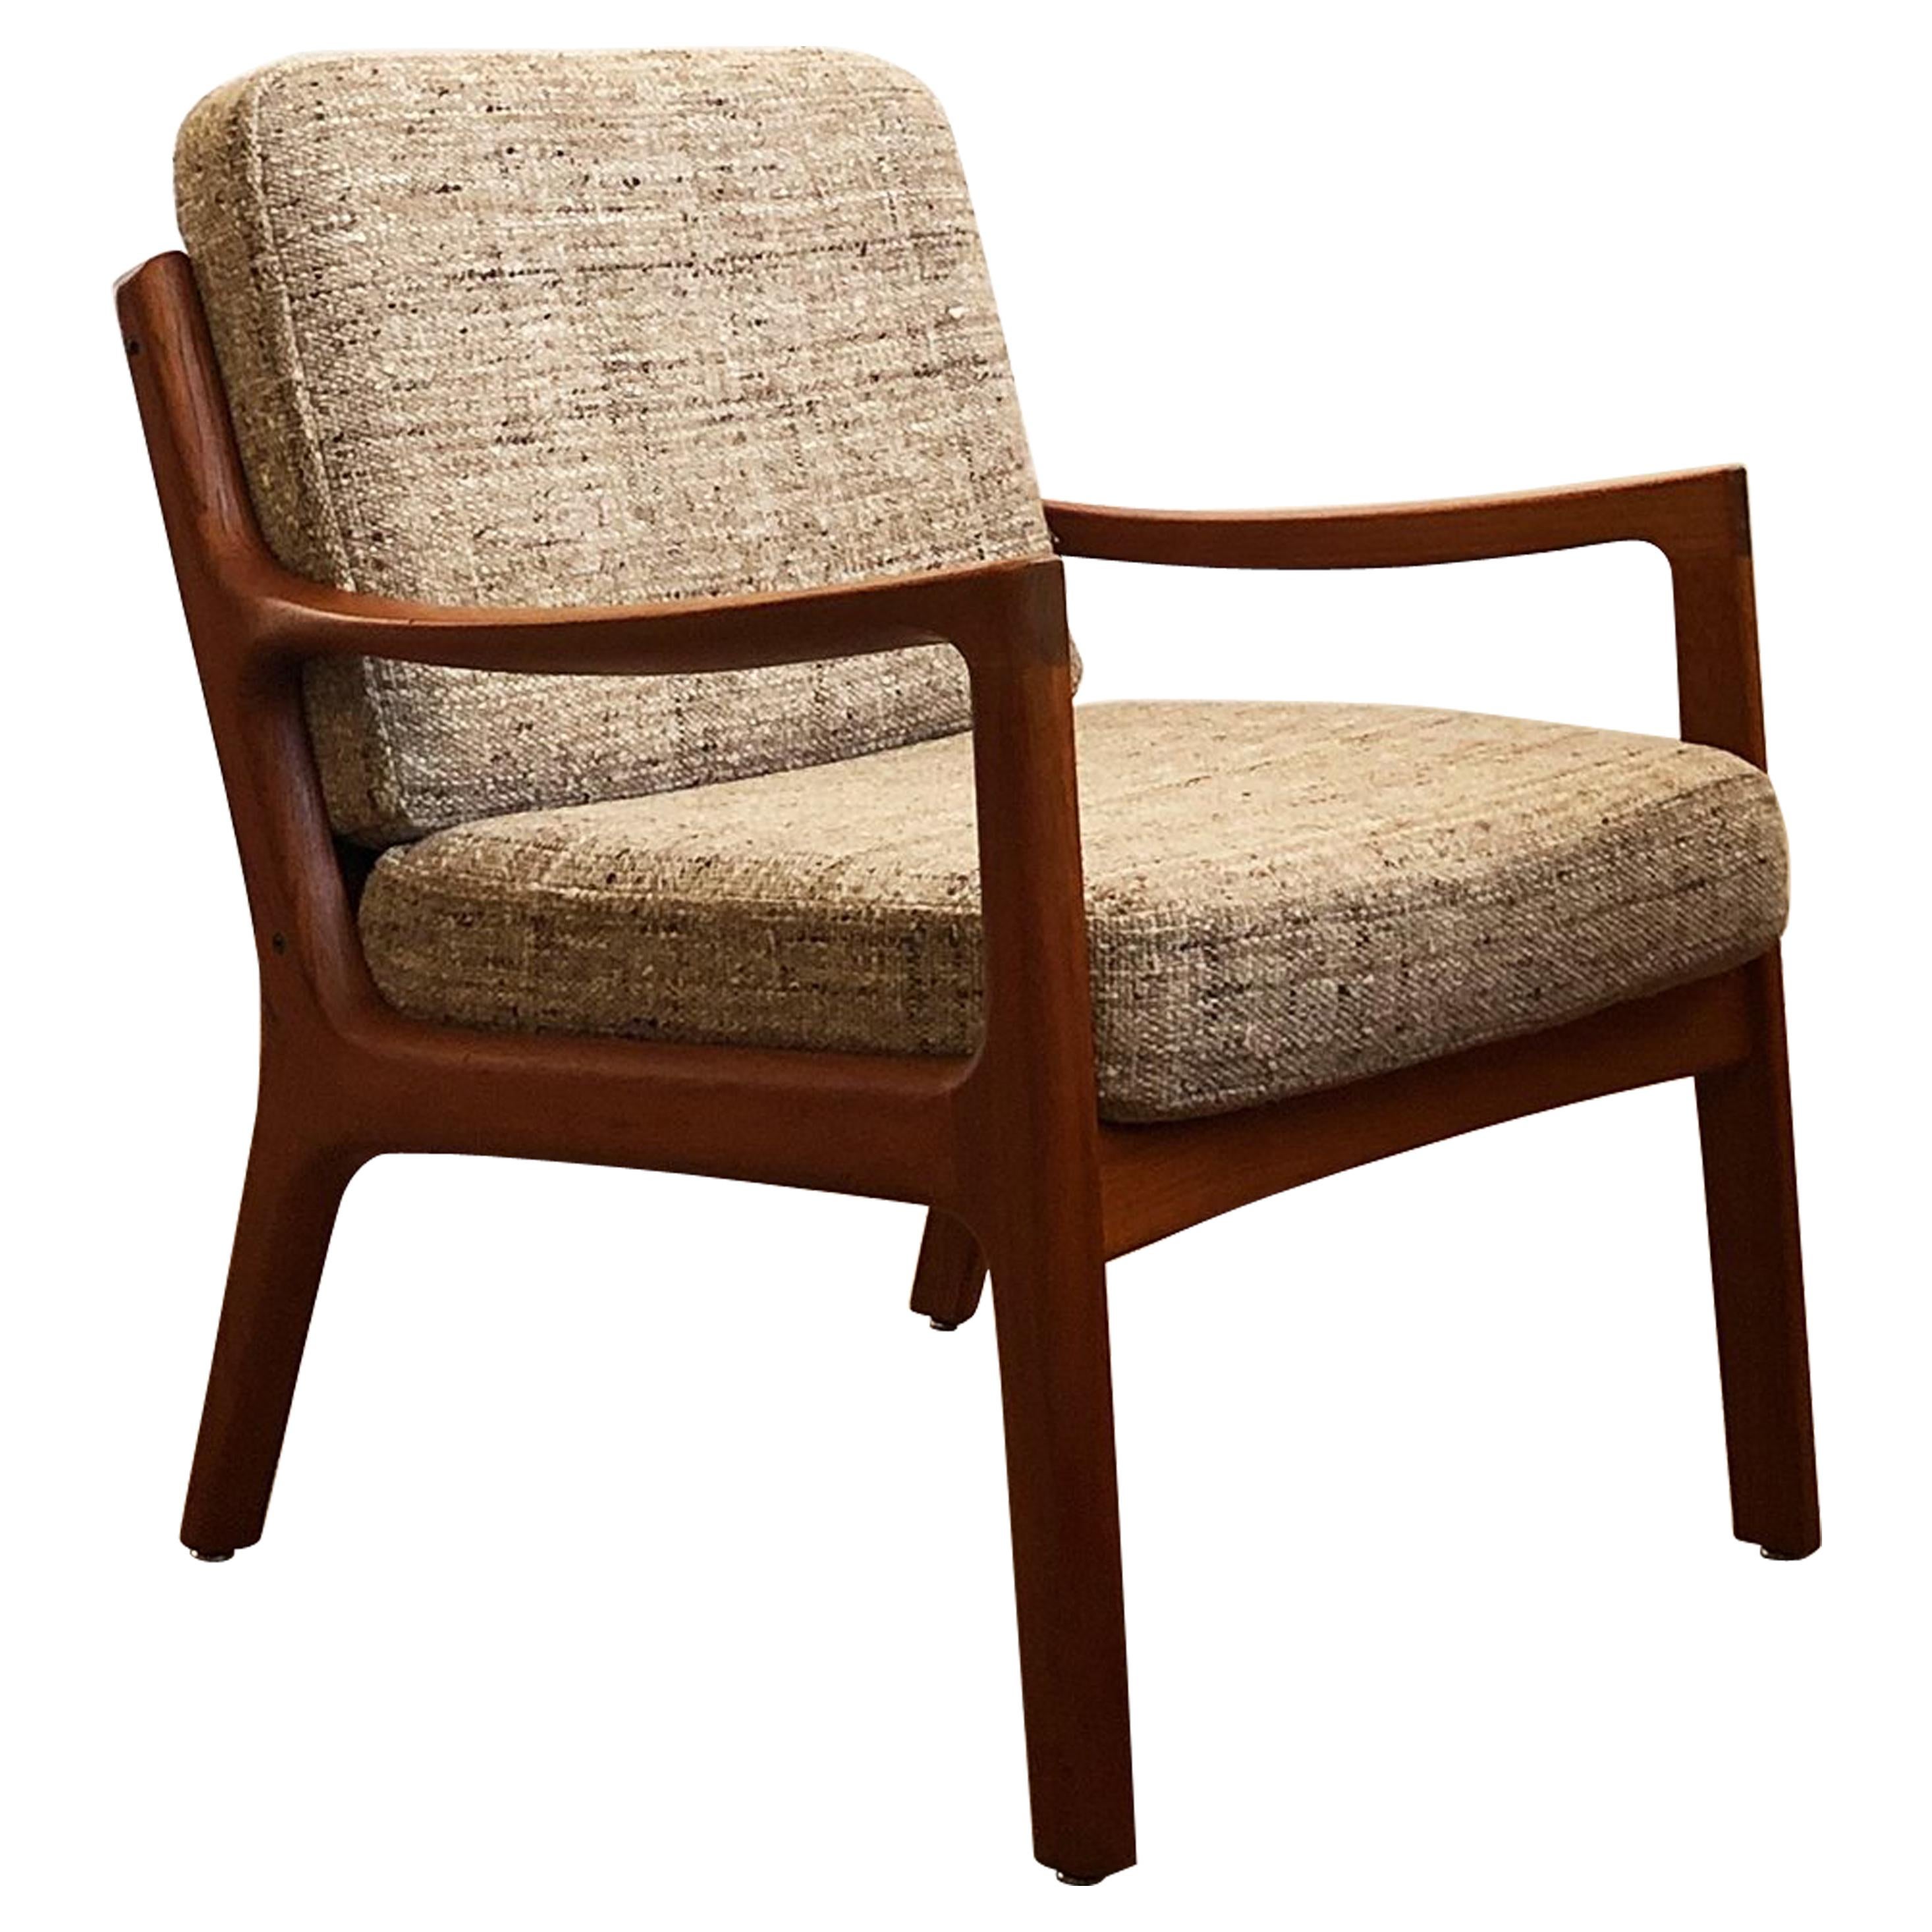 Midcentury Teak Lounge Chair, Senator Series, Ole Wanscher for France and Son